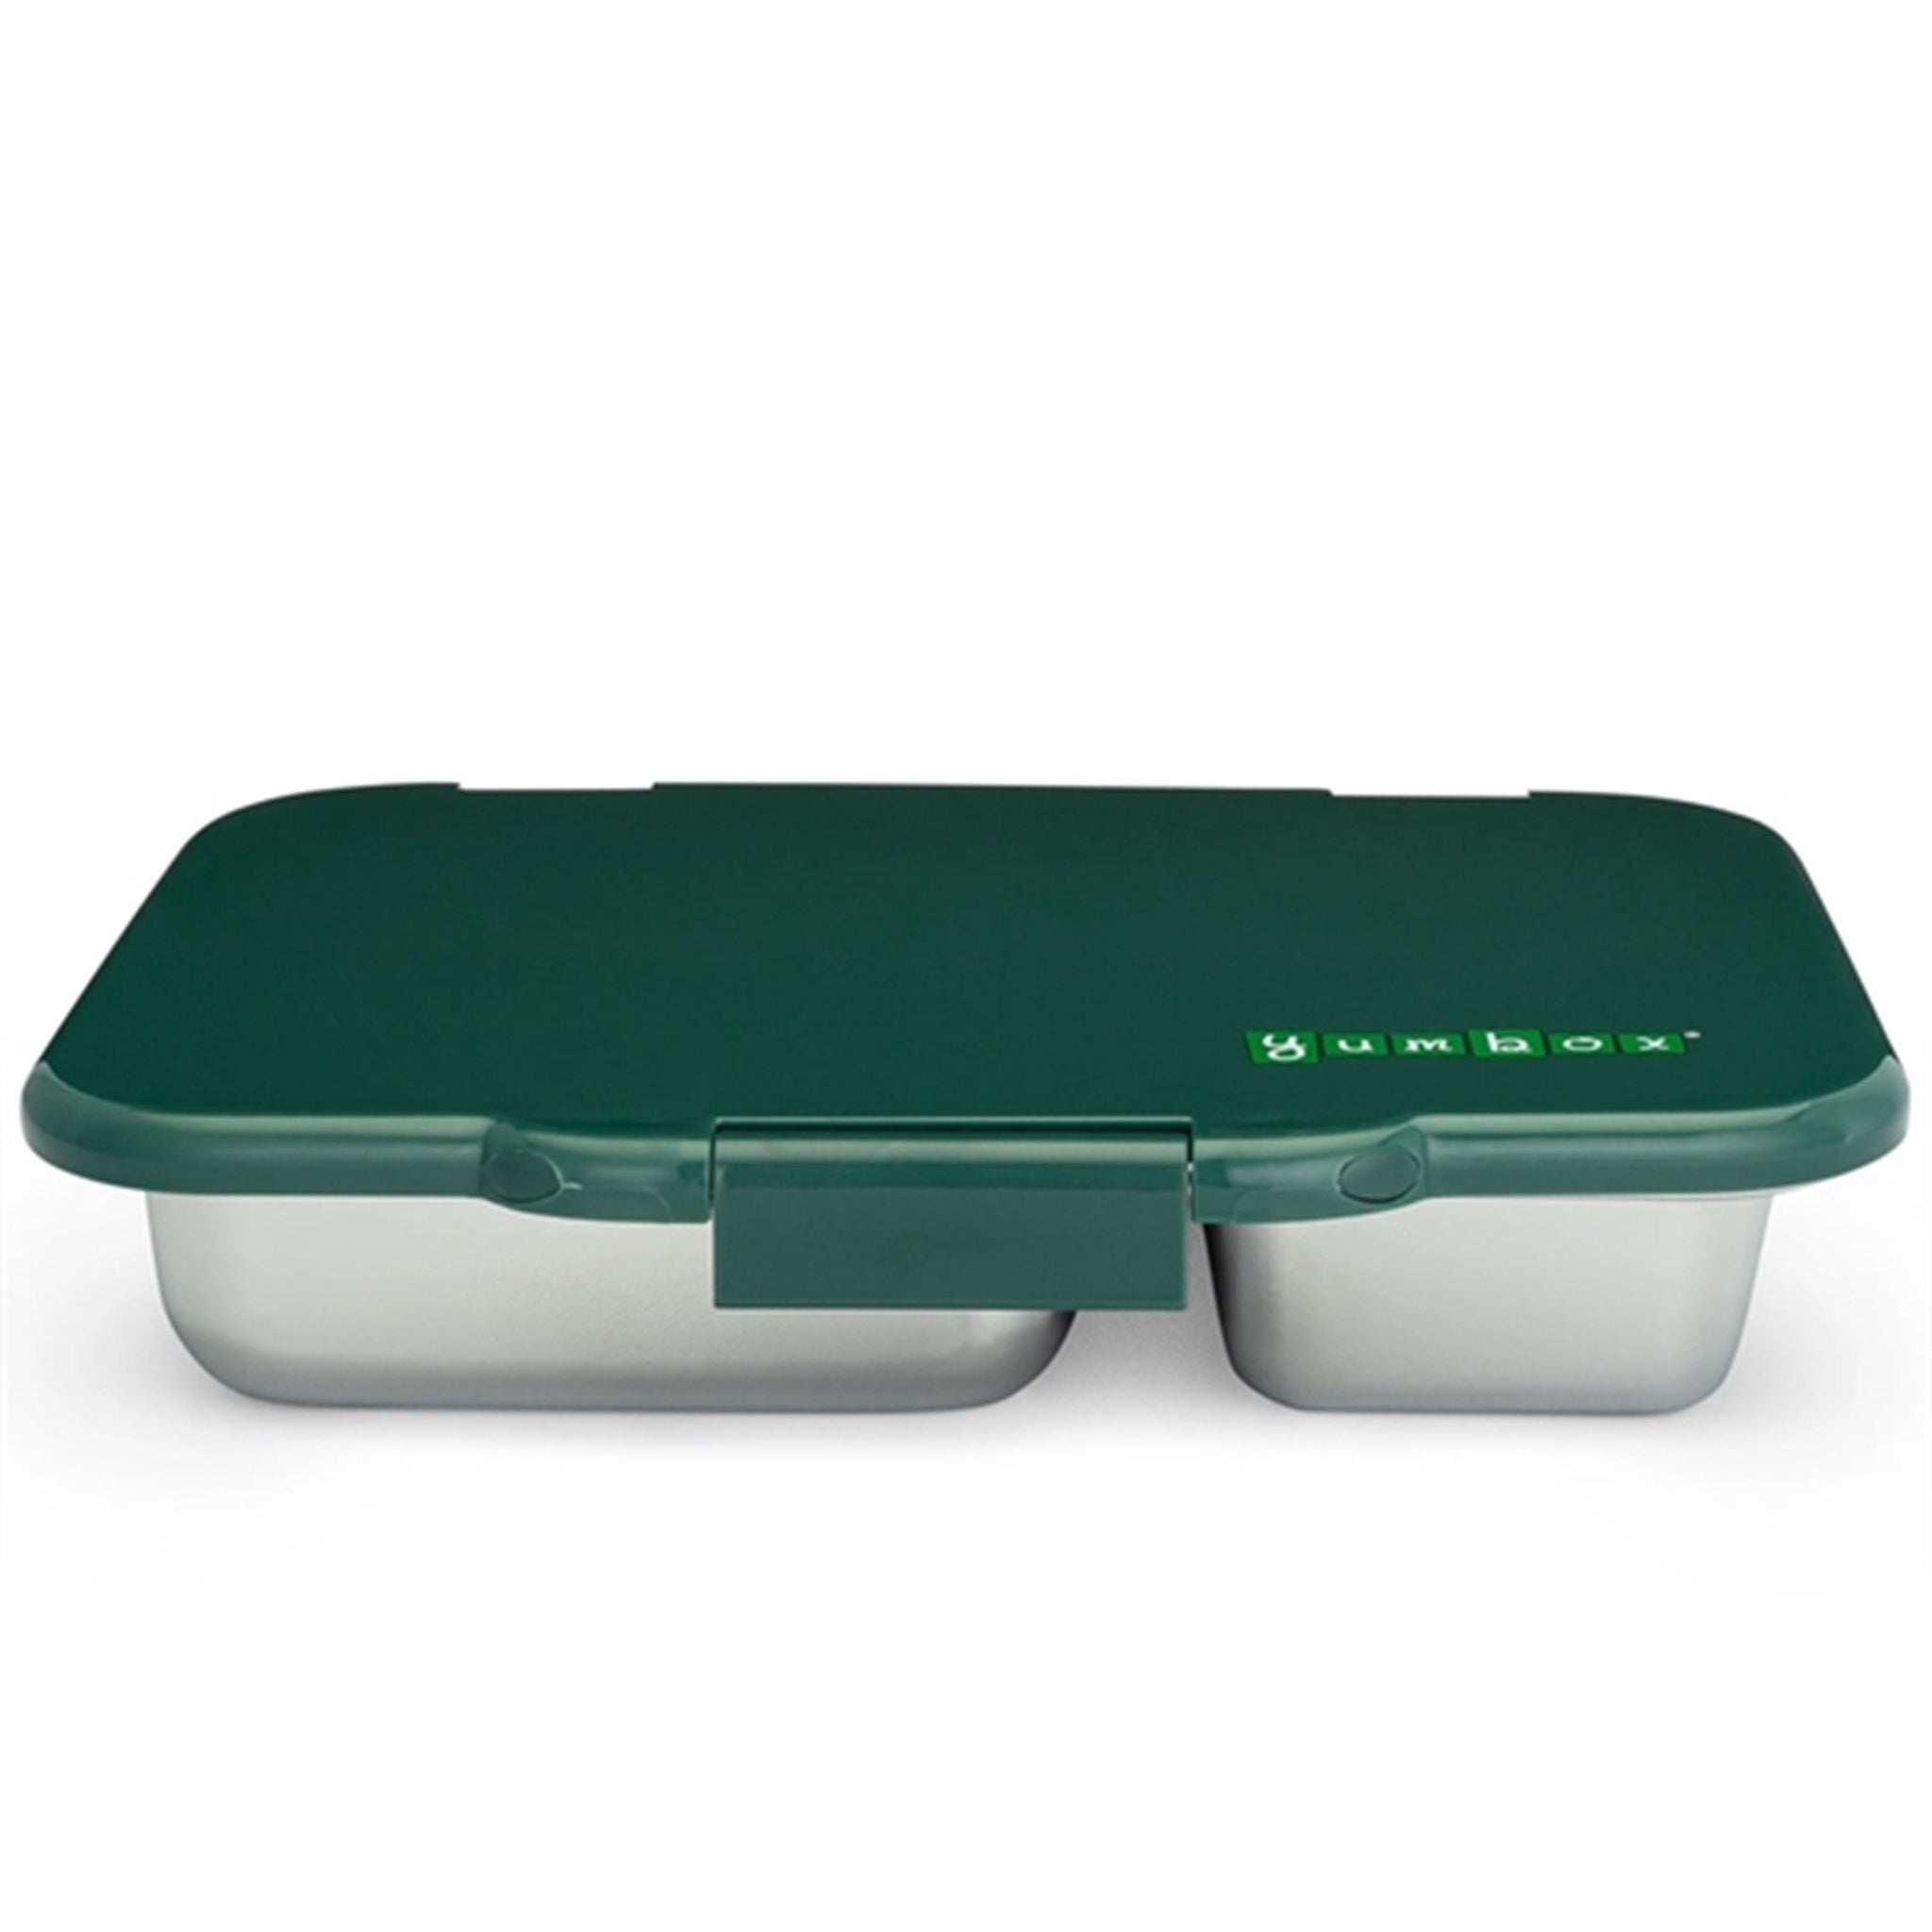 Yumbox Presto Stainless Steel Lunch Box Kale Green 6